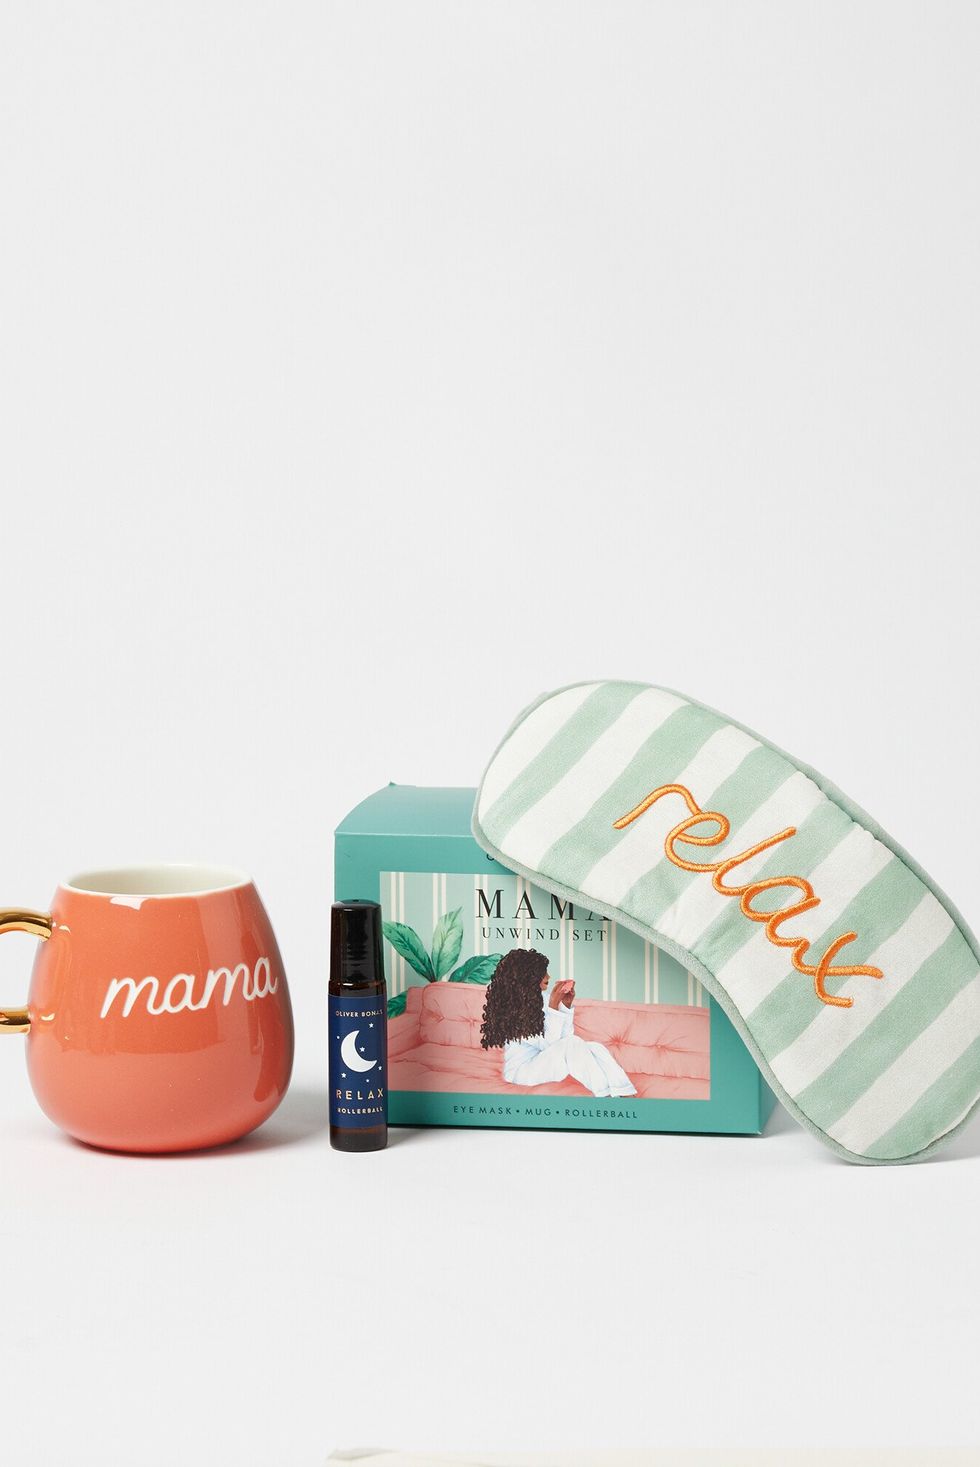 15 Gifts for New Parents